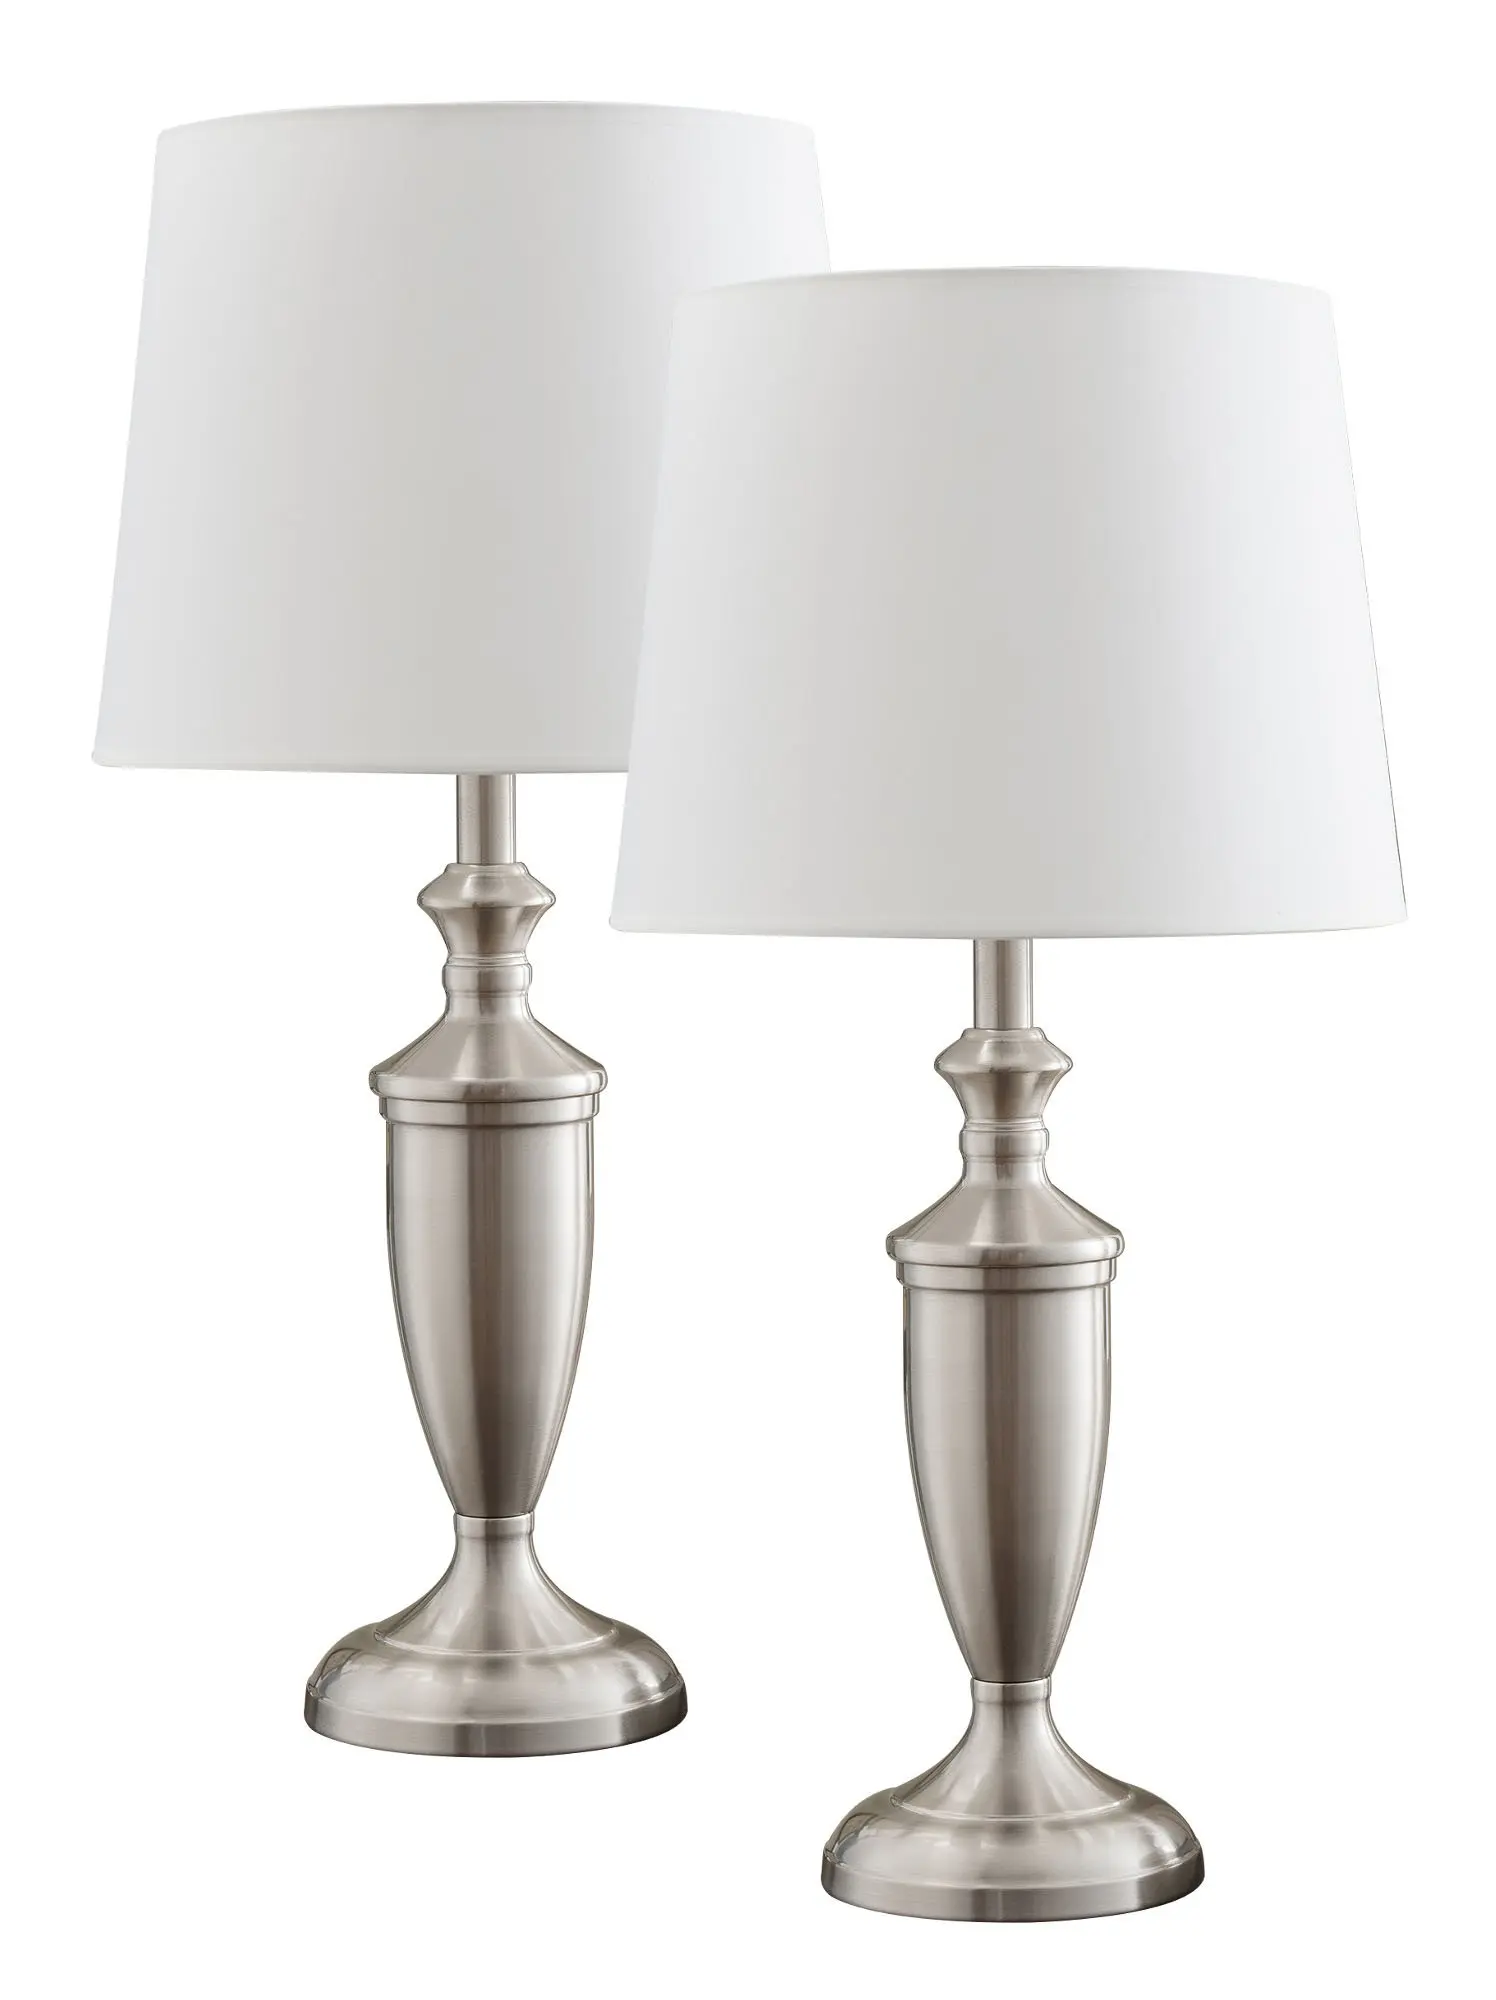 Walnut With Silver Shade Table Lamps Set of 2 Kings Brand Brushed Nickel